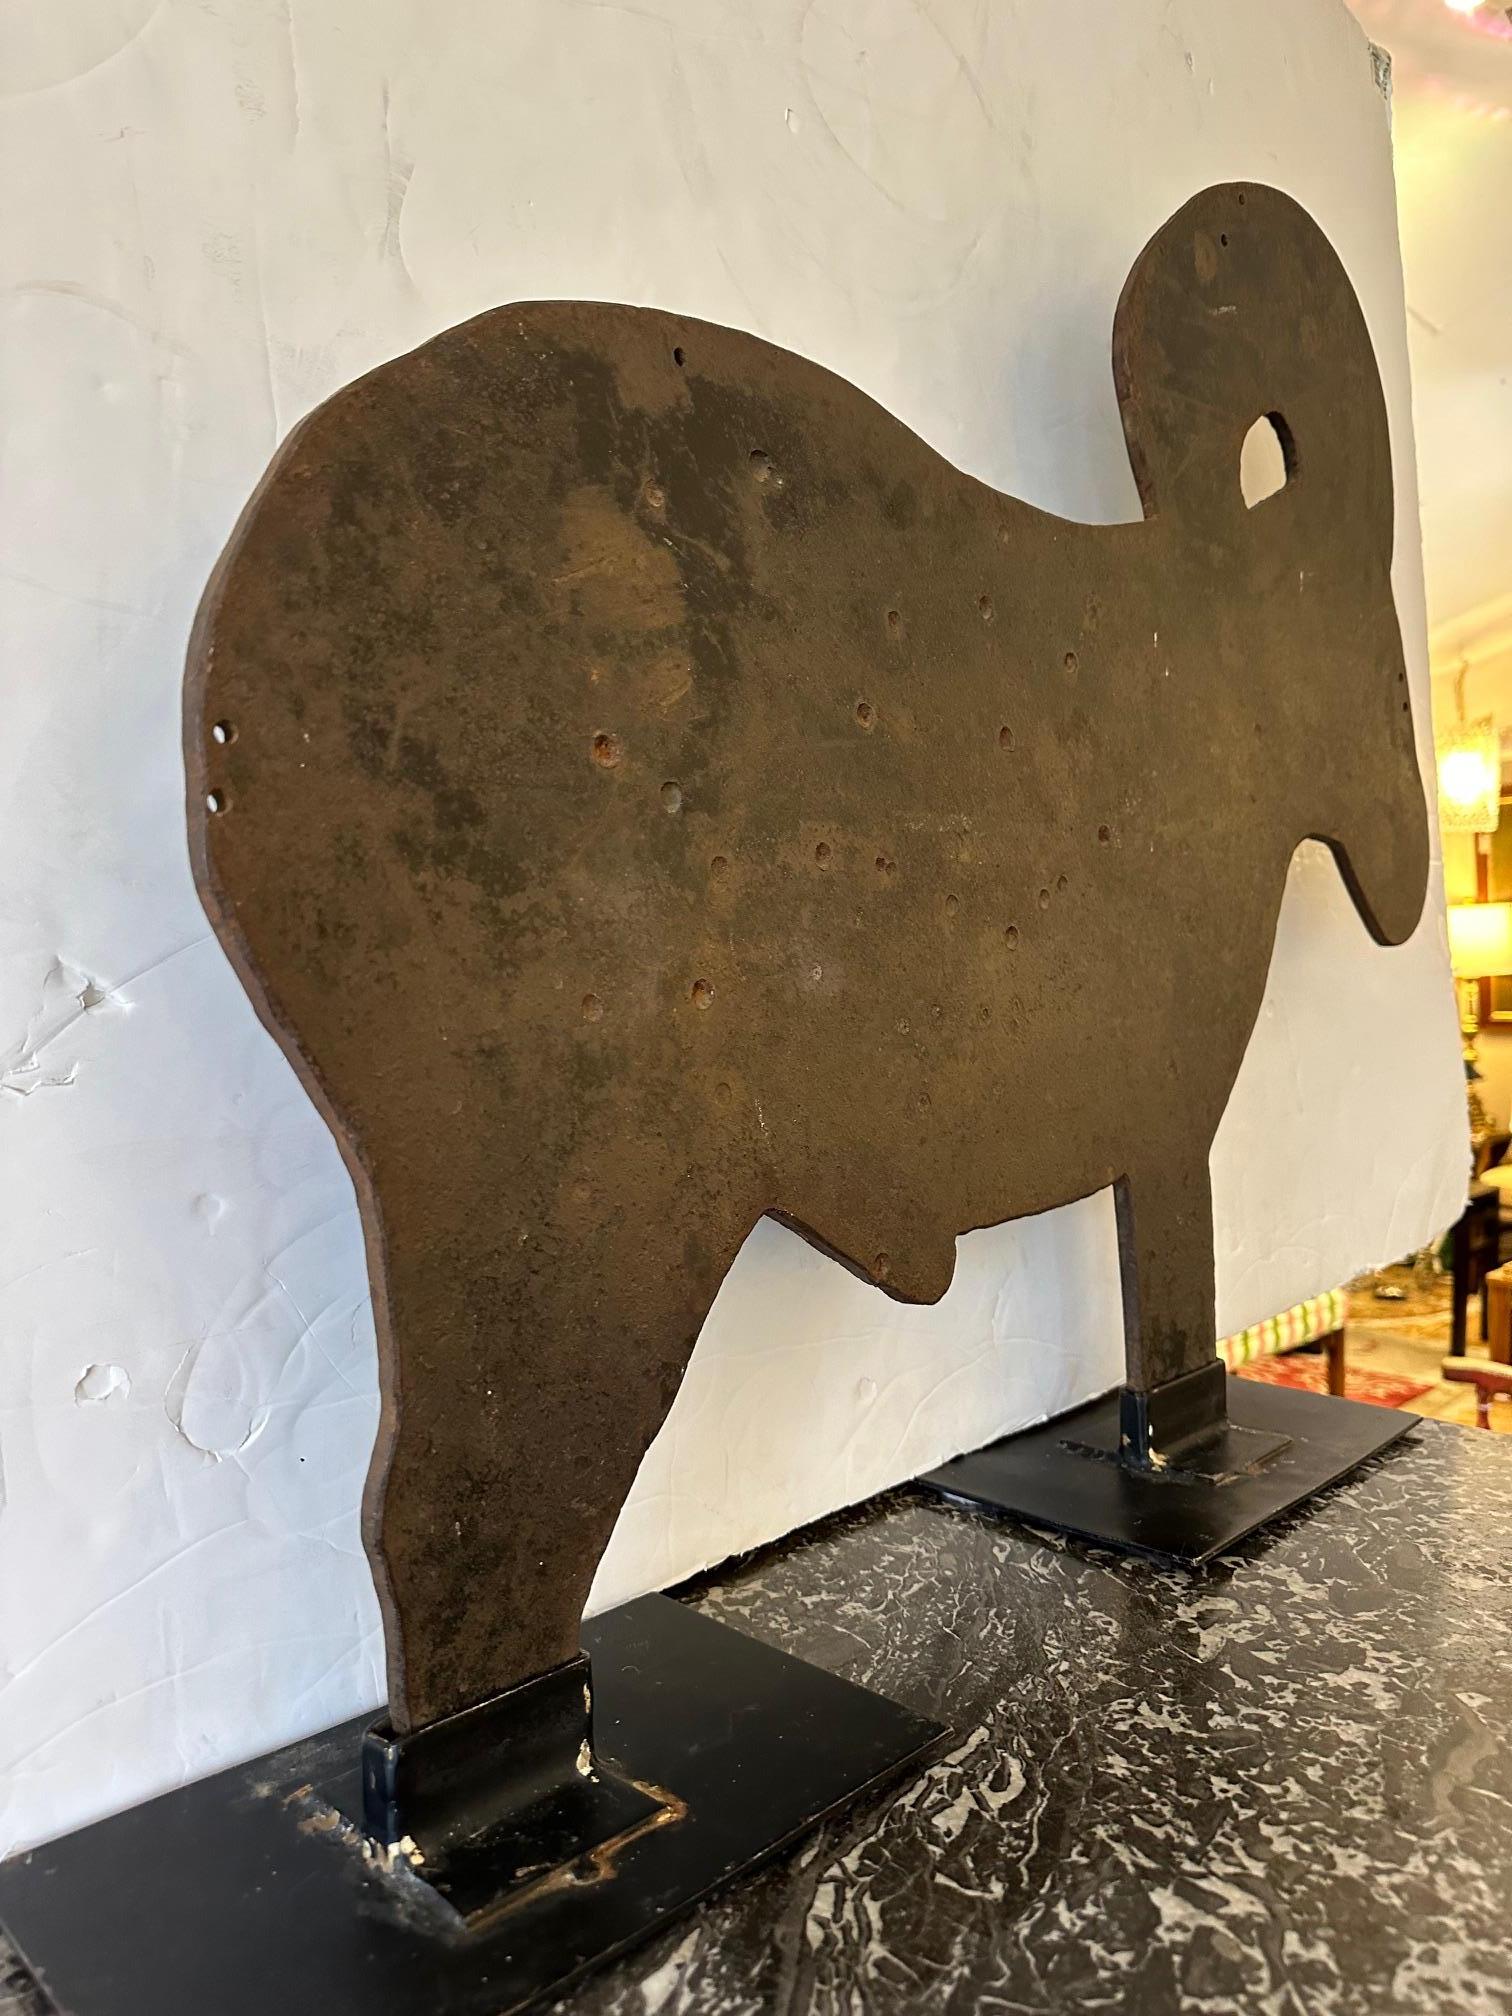 Fabulous folk art freestanding animal sculpture made from found carnival art shooting gallery iron ram.  Rich with authentic character, the brown patinated surface is pocked with bullet holes.  Custom black iron stand created to allow the form to be